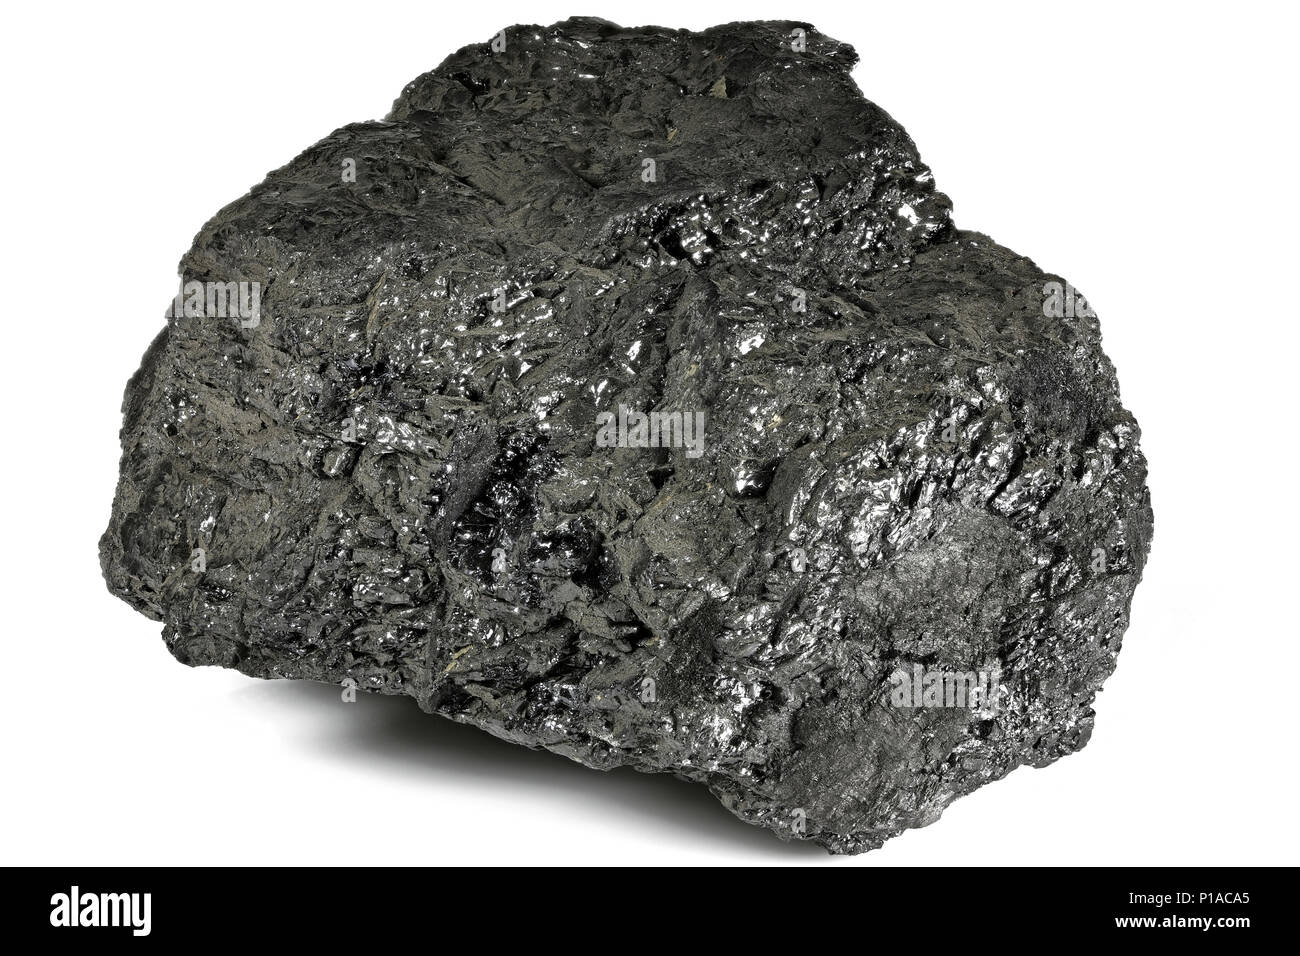 lignite (brown coal) from Bergheim/ Germany isolated on white